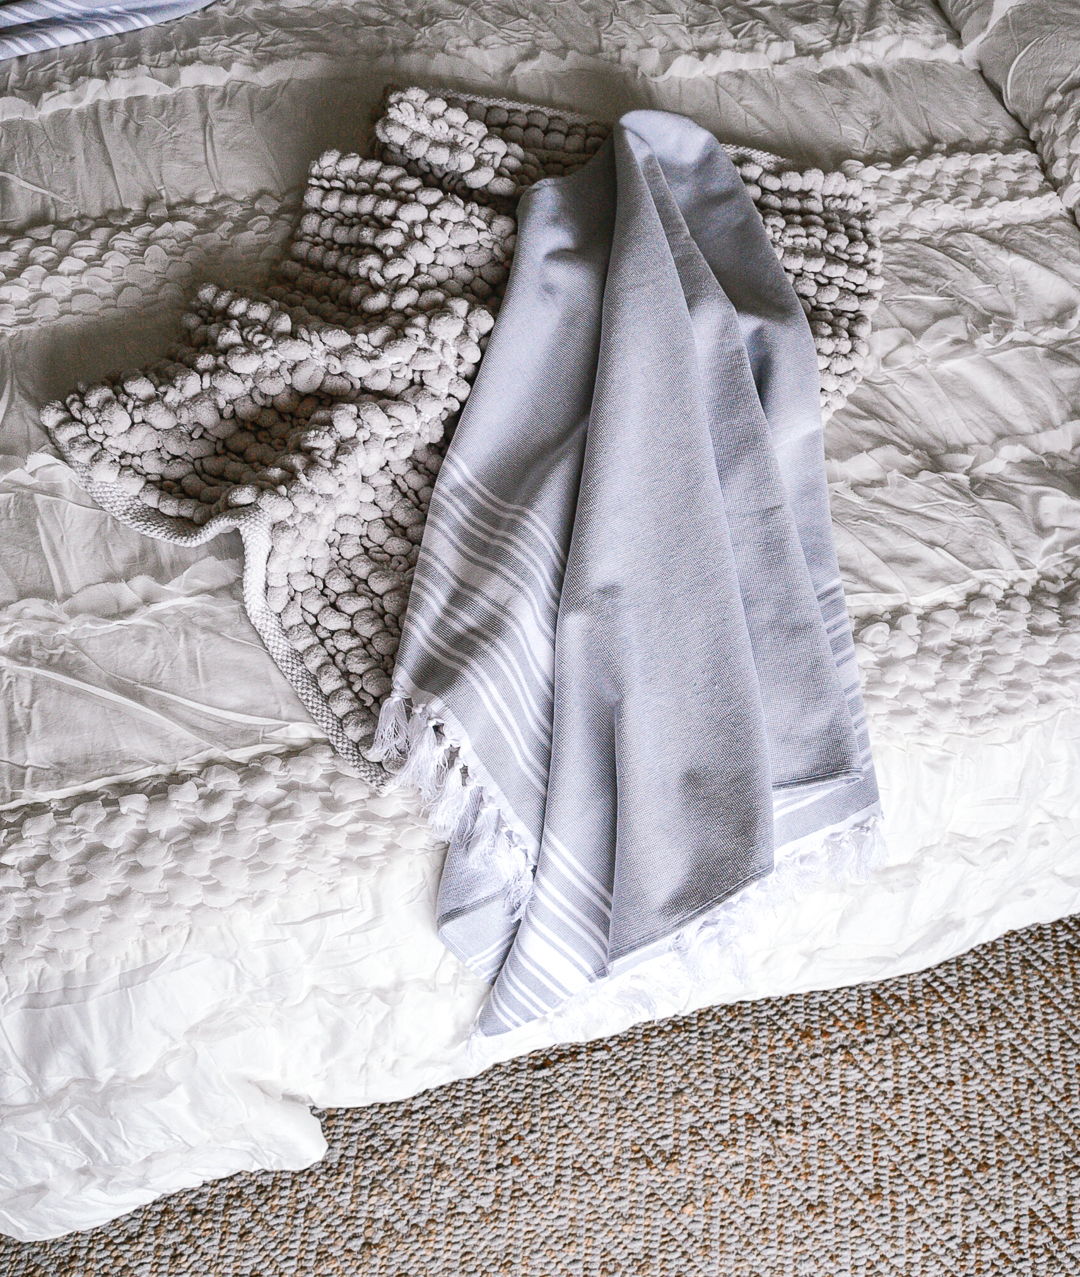 Grey bubbled bath mat and turkish linen towels - Our Master Bedroom Linen Refresh with Home Decorators by Chicago style blogger Visions of Vogue